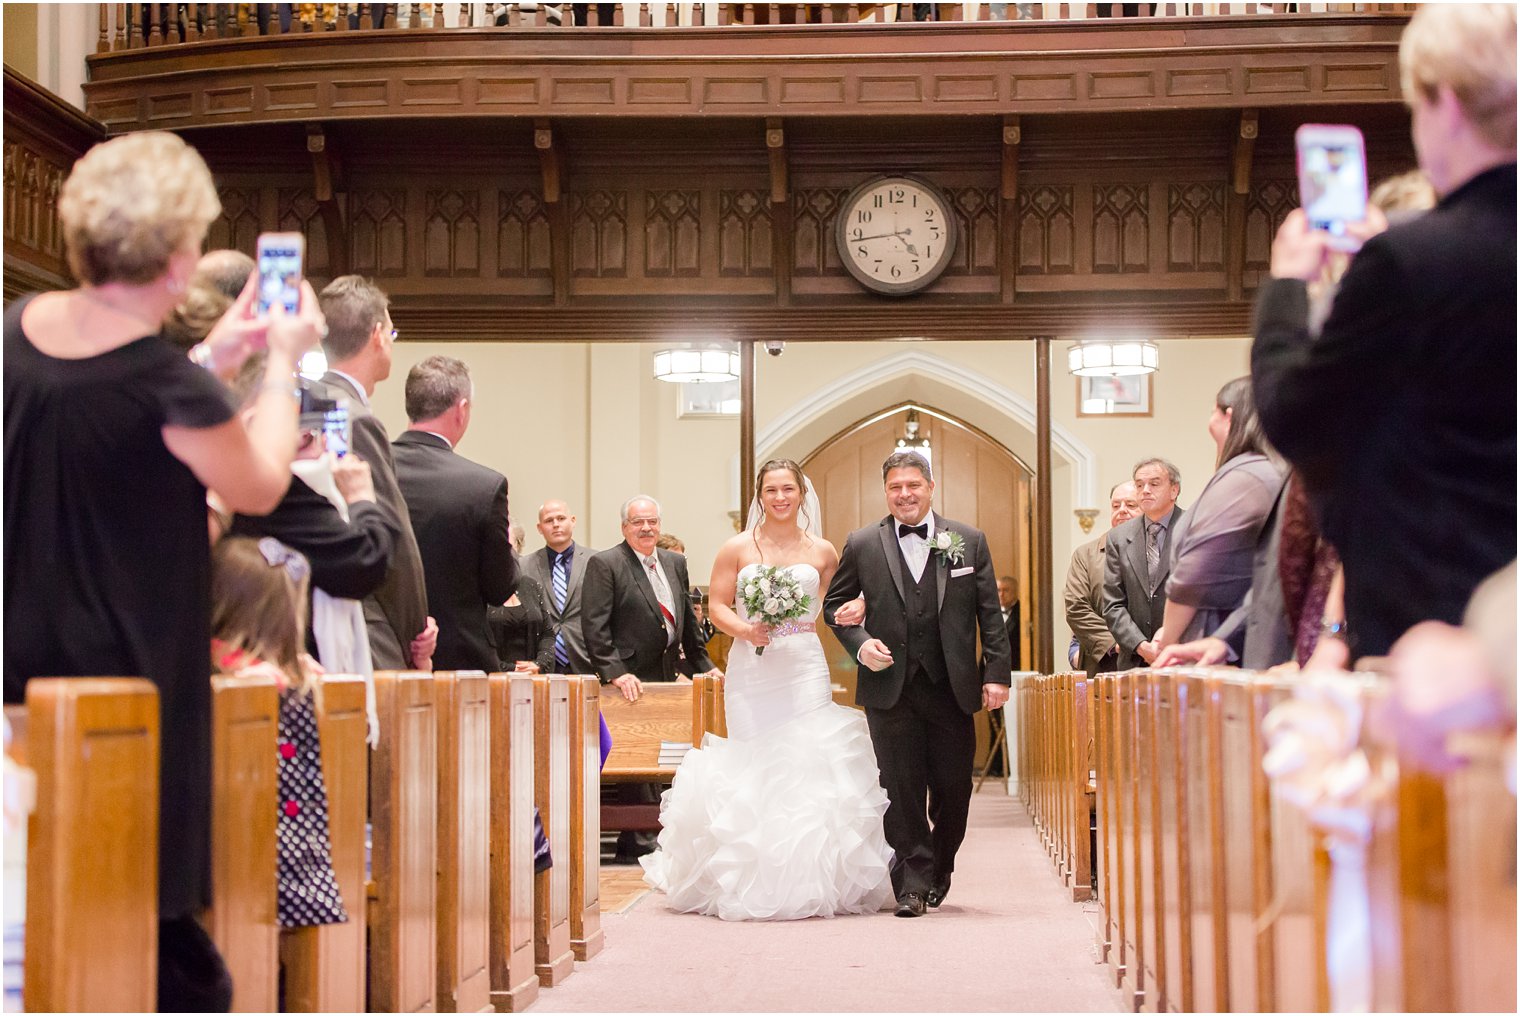 Bride walking down the aisle at Wedding ceremony at St. Peter the Apostle in New Brunswick, NJ